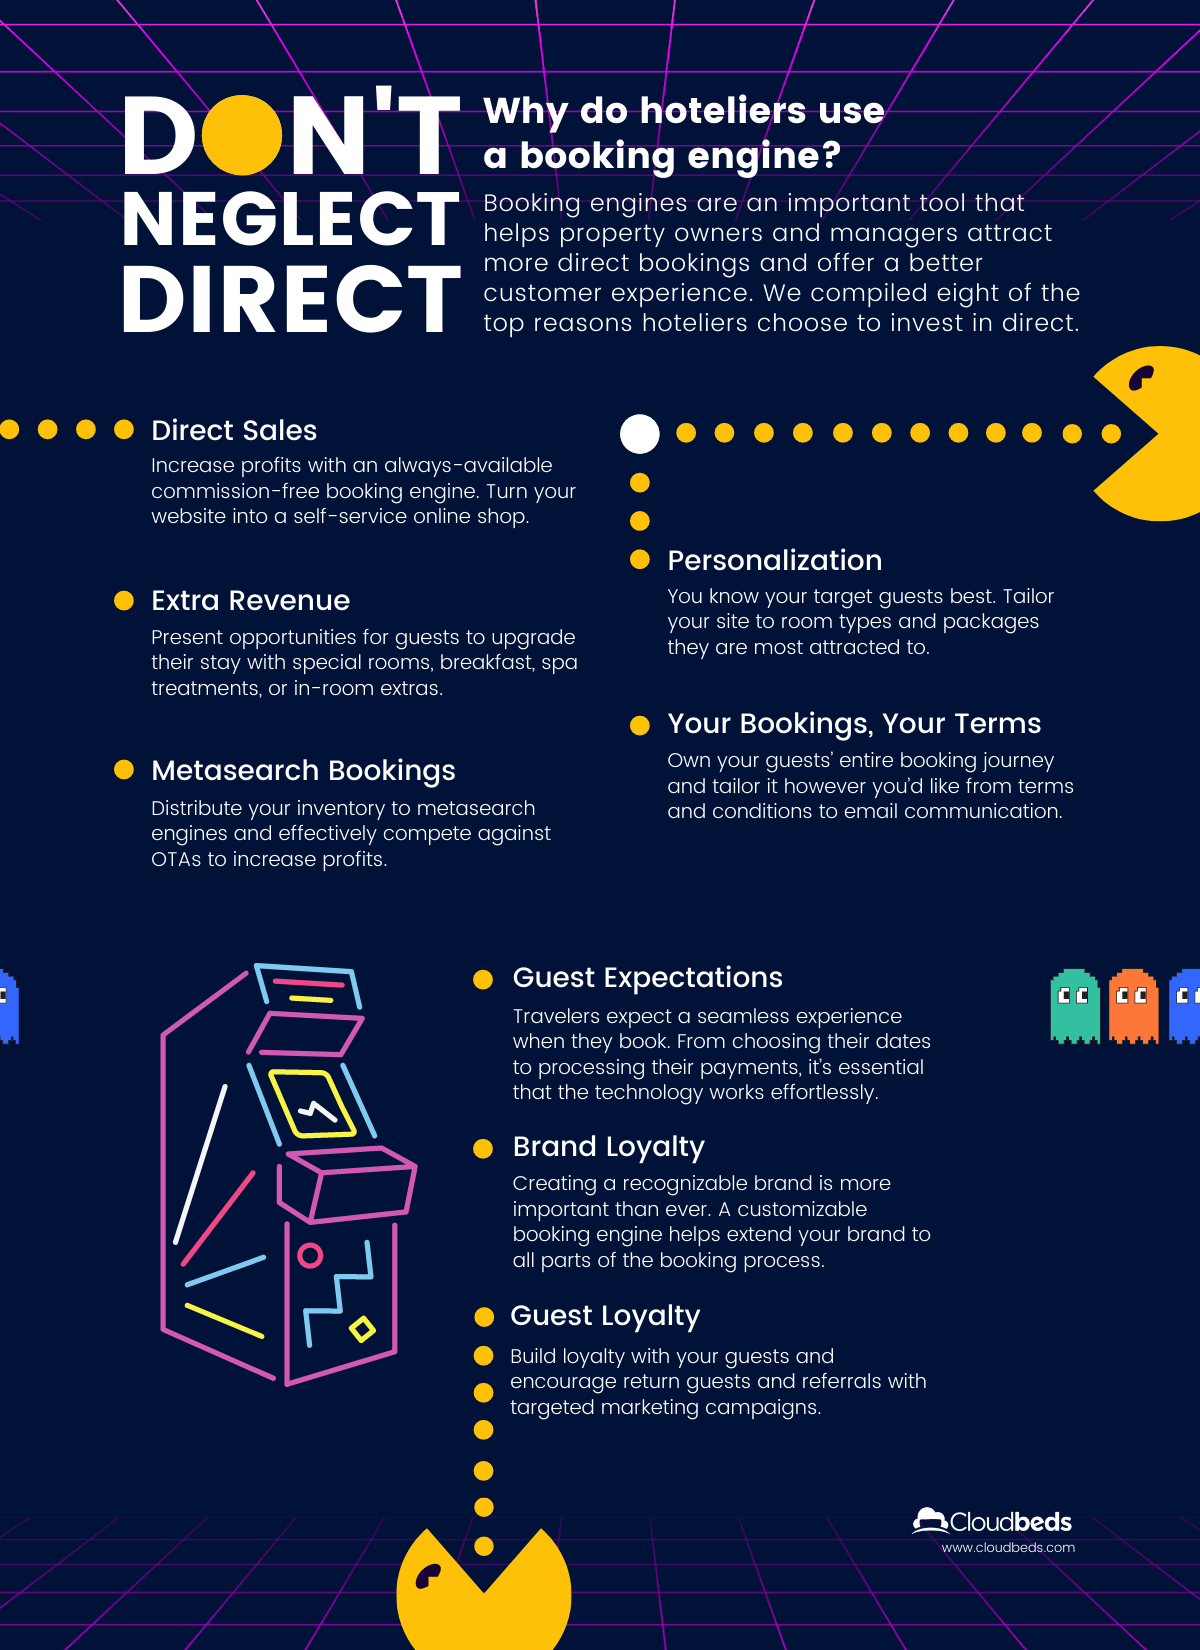 direct bookings infographic